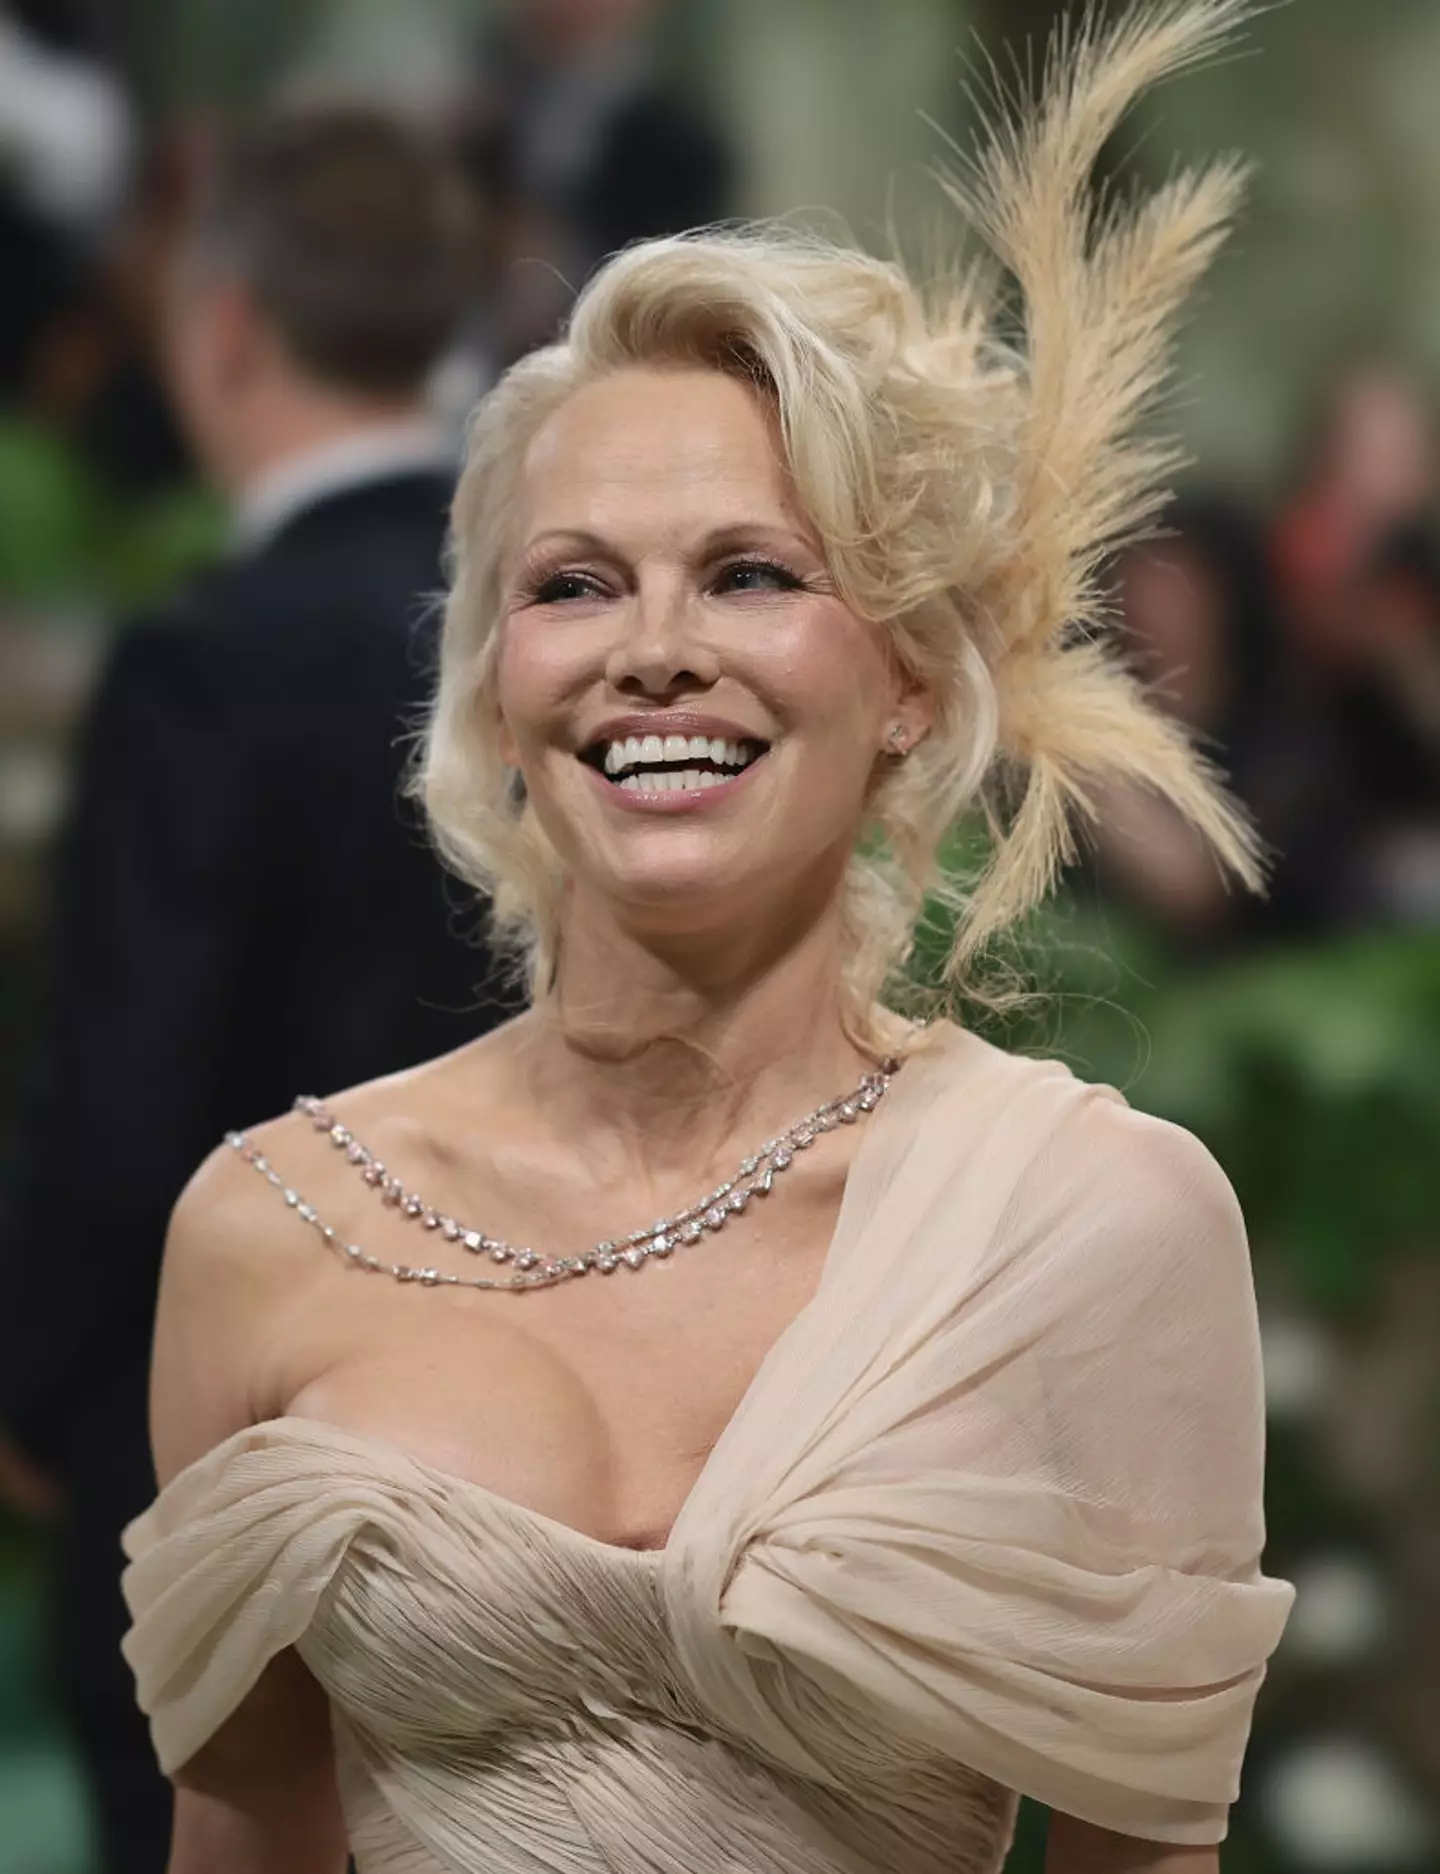 Pamela Anderson wore a little makeup at this year's Met Gala. (Dimitrios Kambouris/Getty Images for The Met Museum/Vogue)